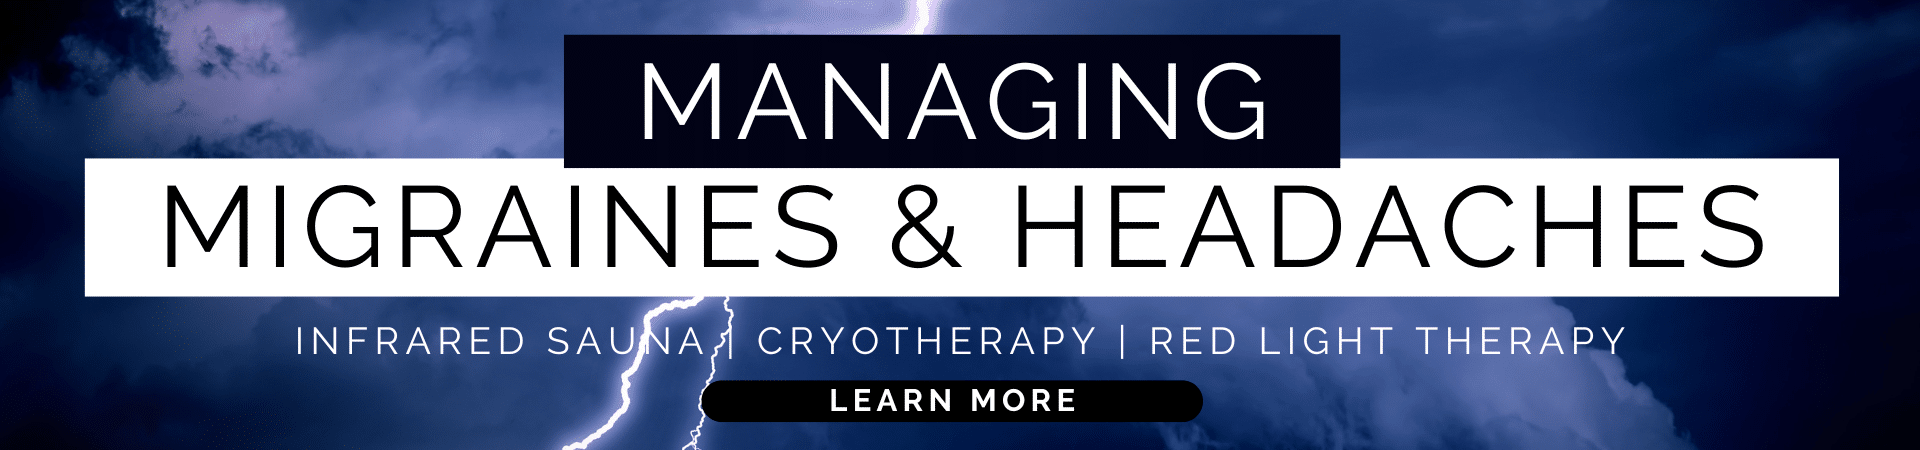 Lern how to help manage migraines and headaches with Recovery Cryo